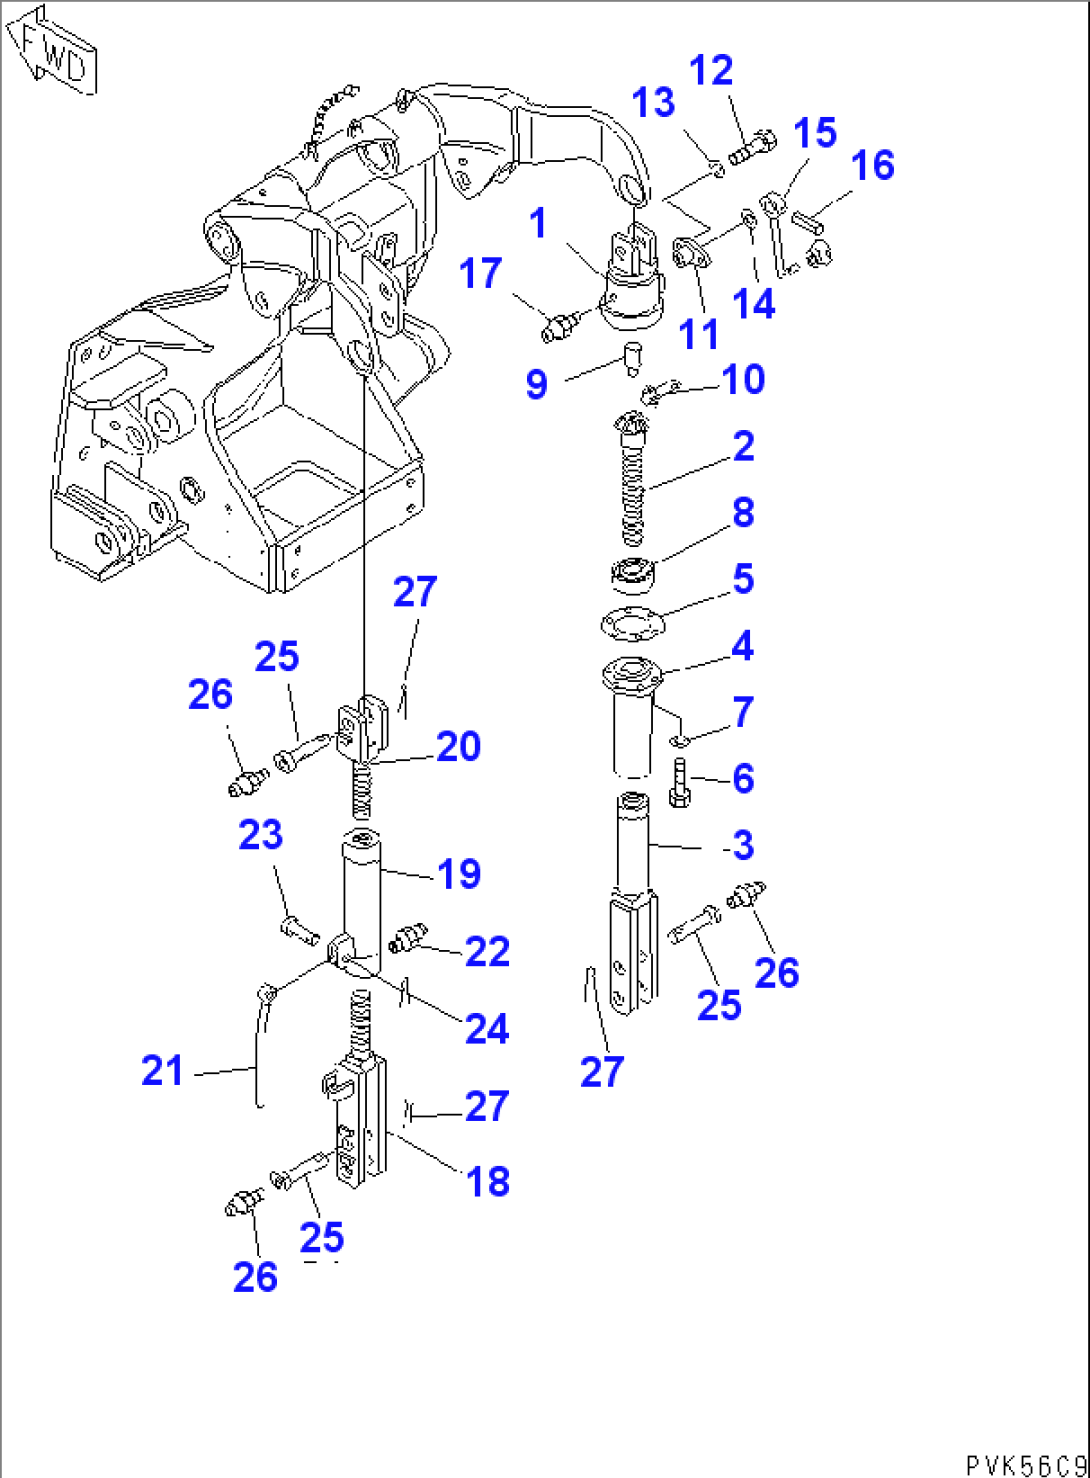 3-POINT HITCH (LIFTING ROD)(#90001-)